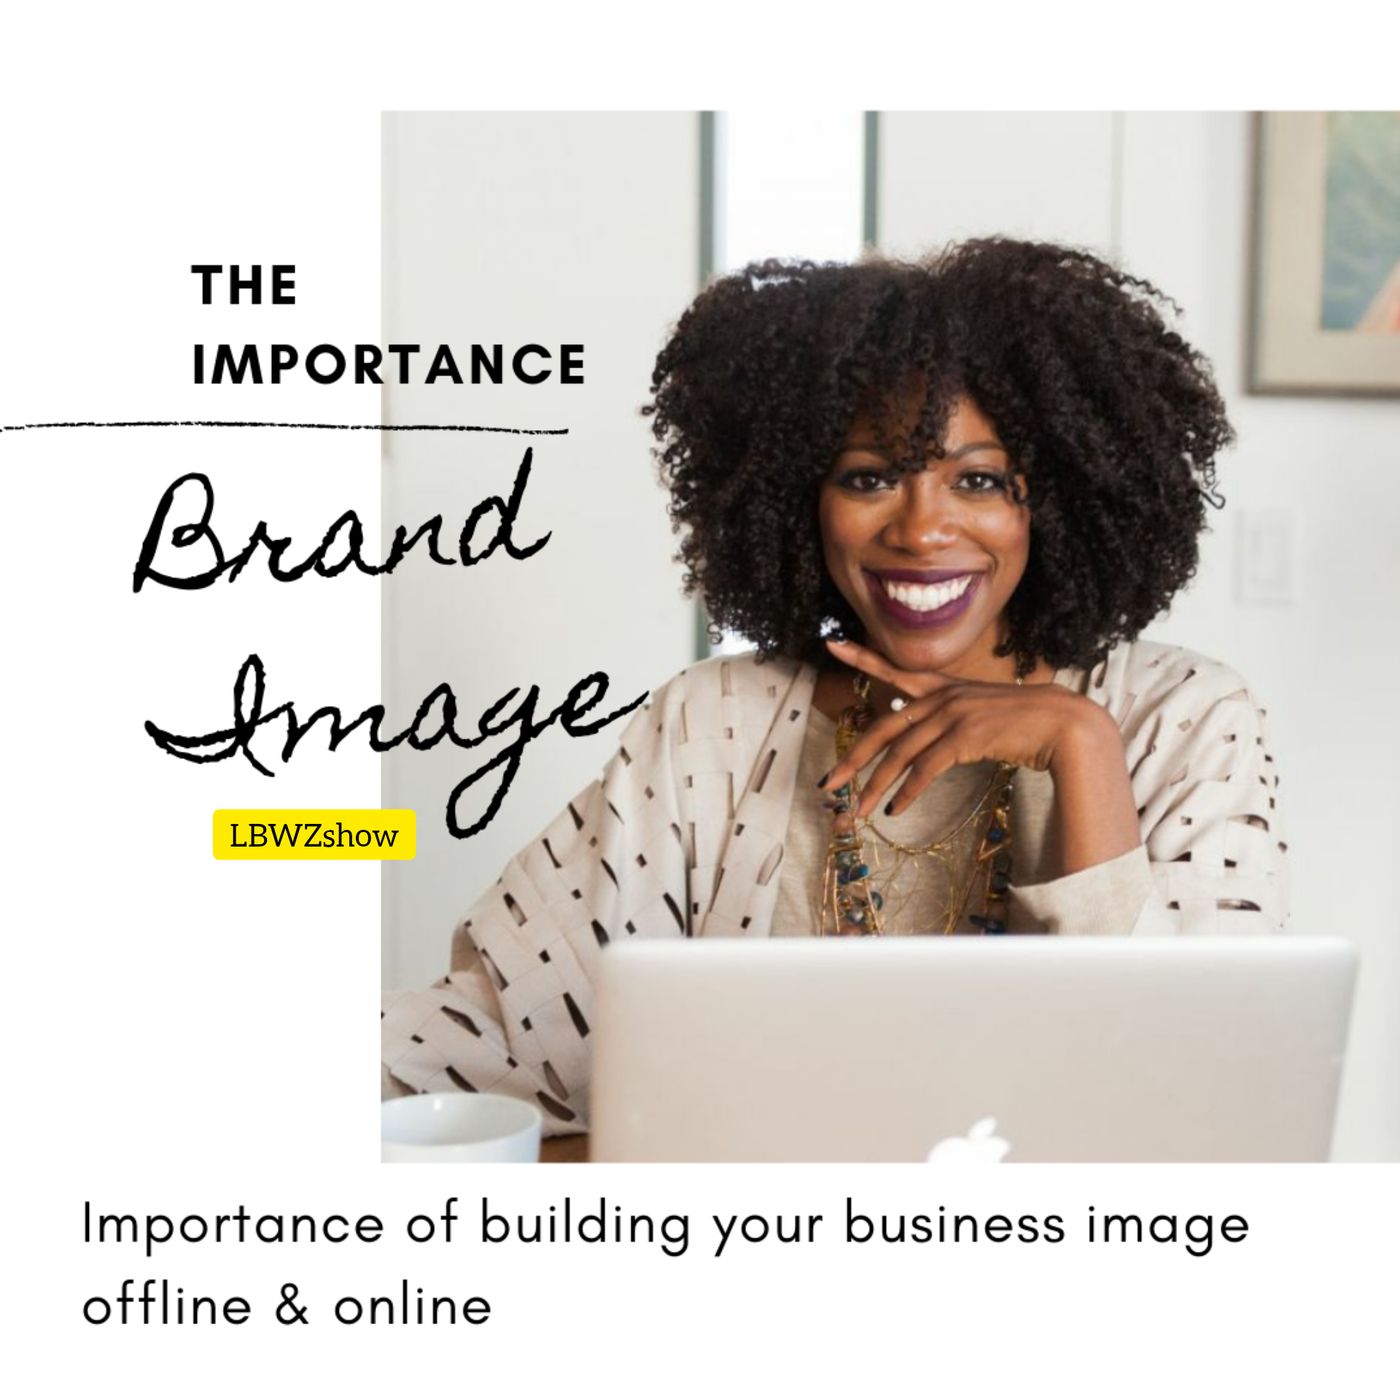 The importance of building your business image offline and online